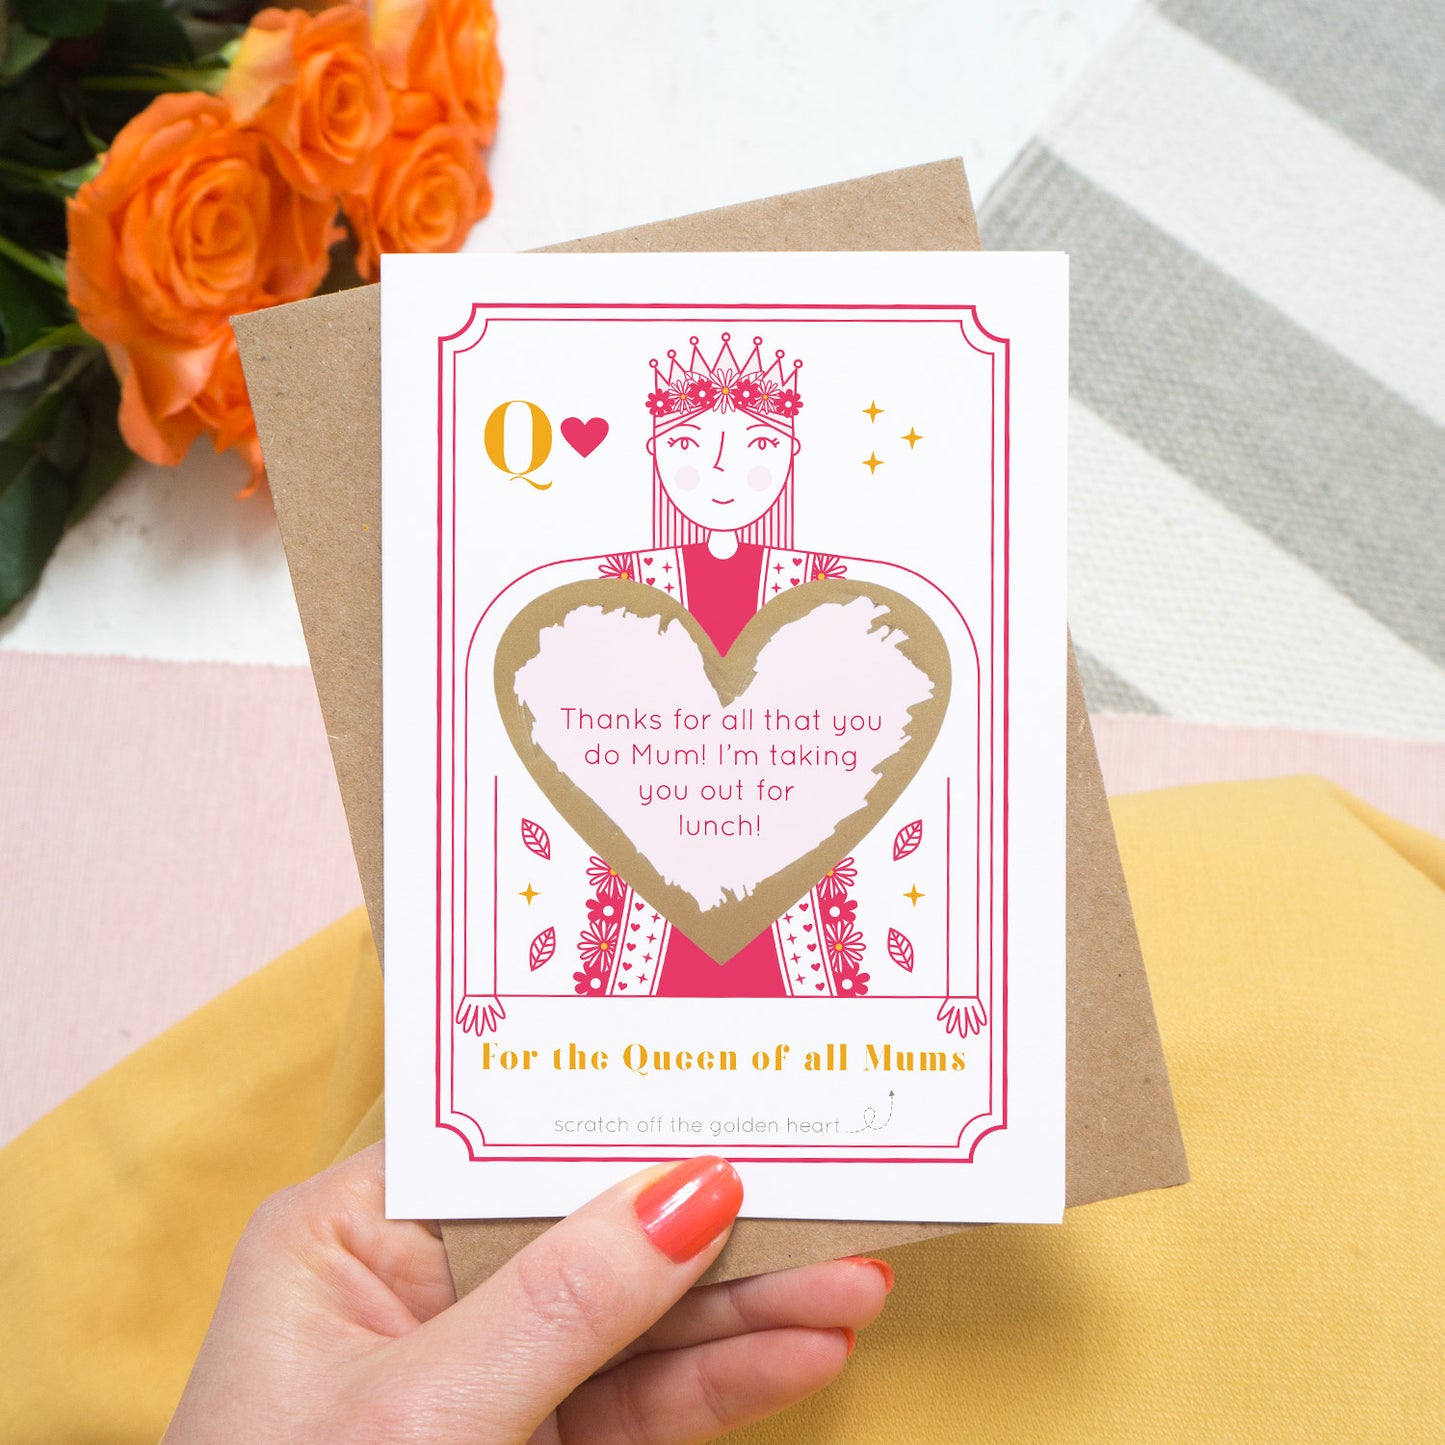 A queen of all mums scratch card showing you where your printed personalisation will go on the card. The card has been scratched off revealing the personalisations and is being held above pink tulips and a yellow skirt.